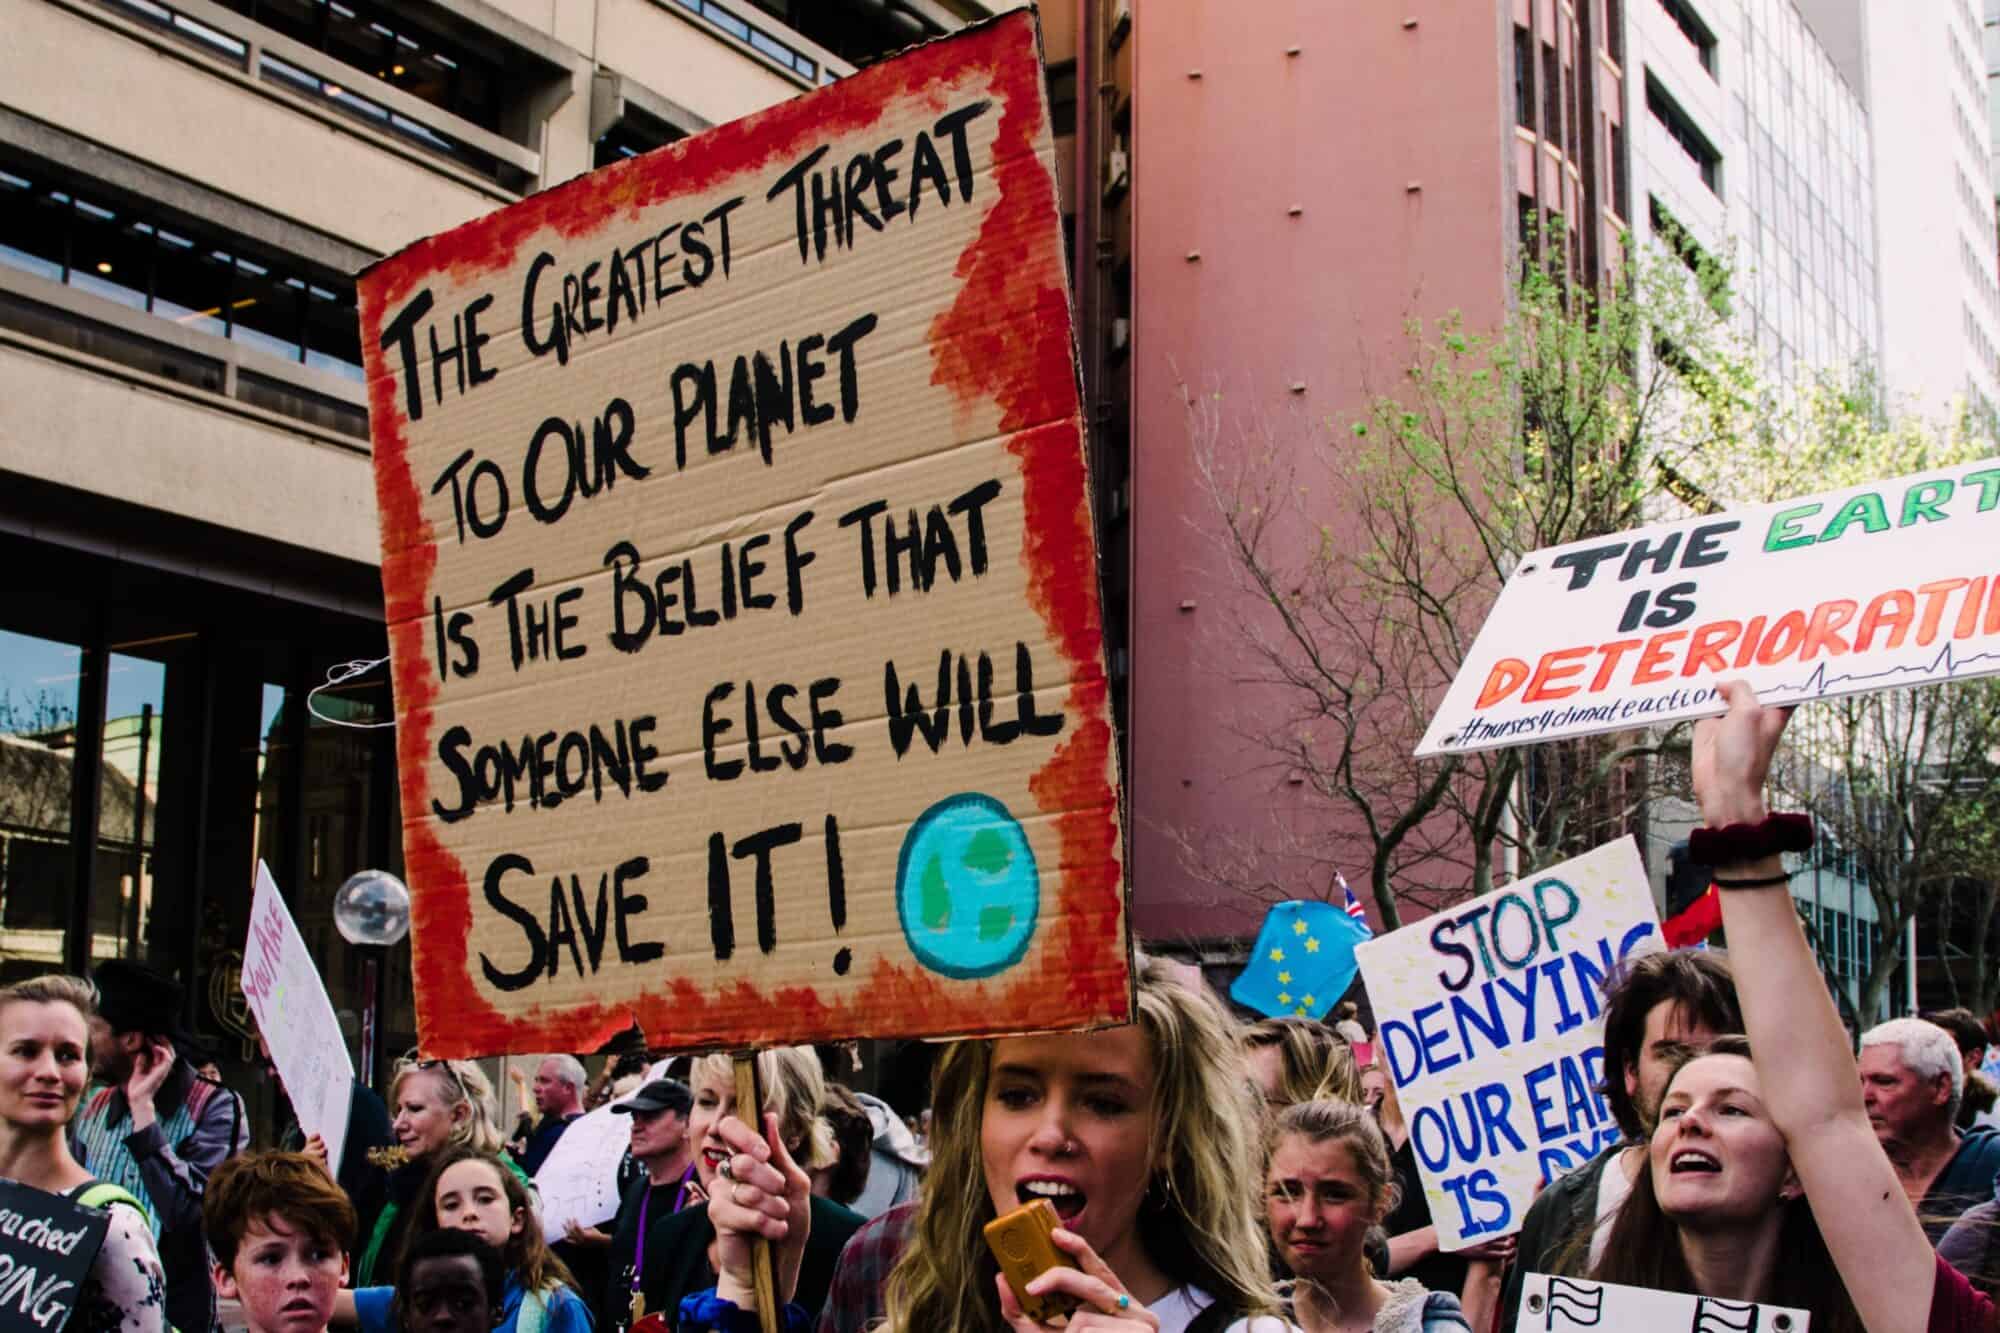 Climate protestors holding up a cardboard sign that reads "The greatest threat to our planet is the belief that someone else will save it"